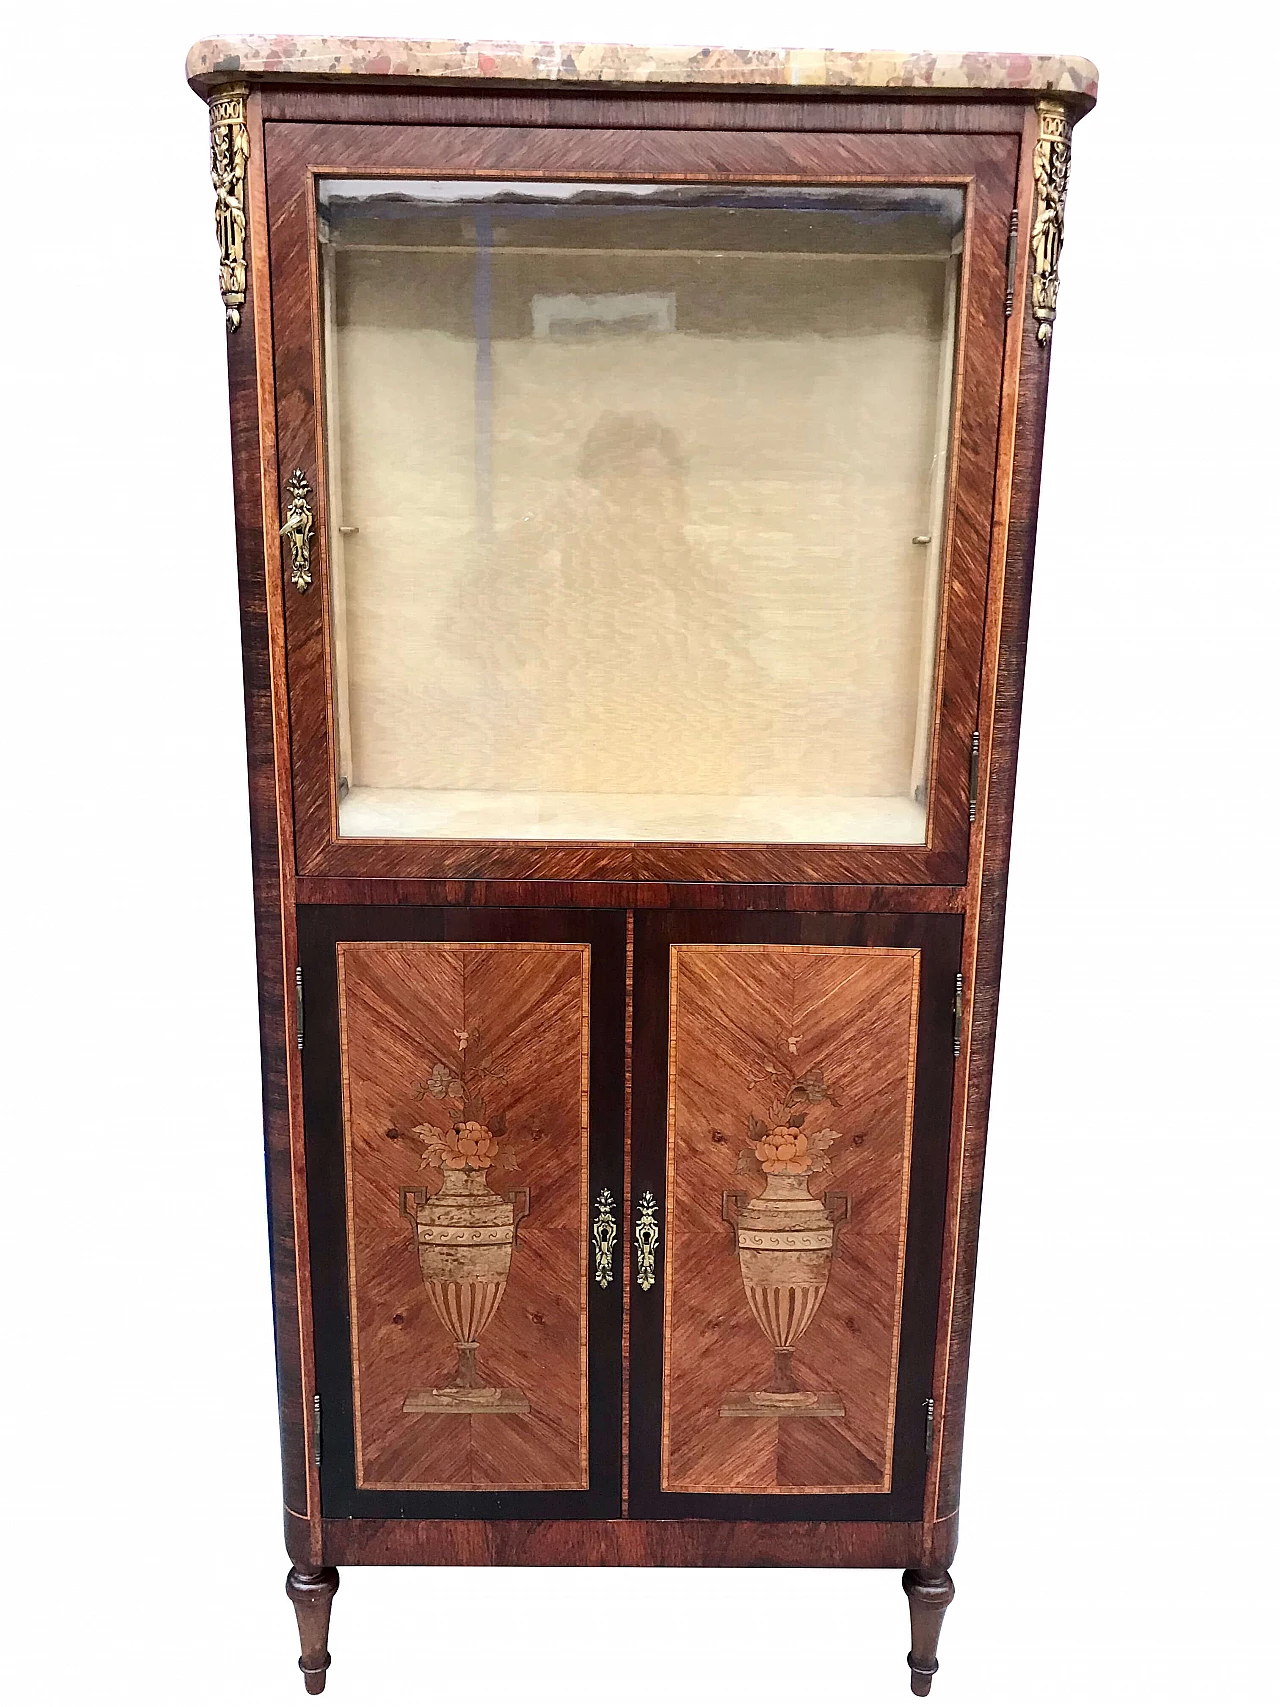 Small inlaid and paved display case by Gouffe Jeaune, 19th century 1163429